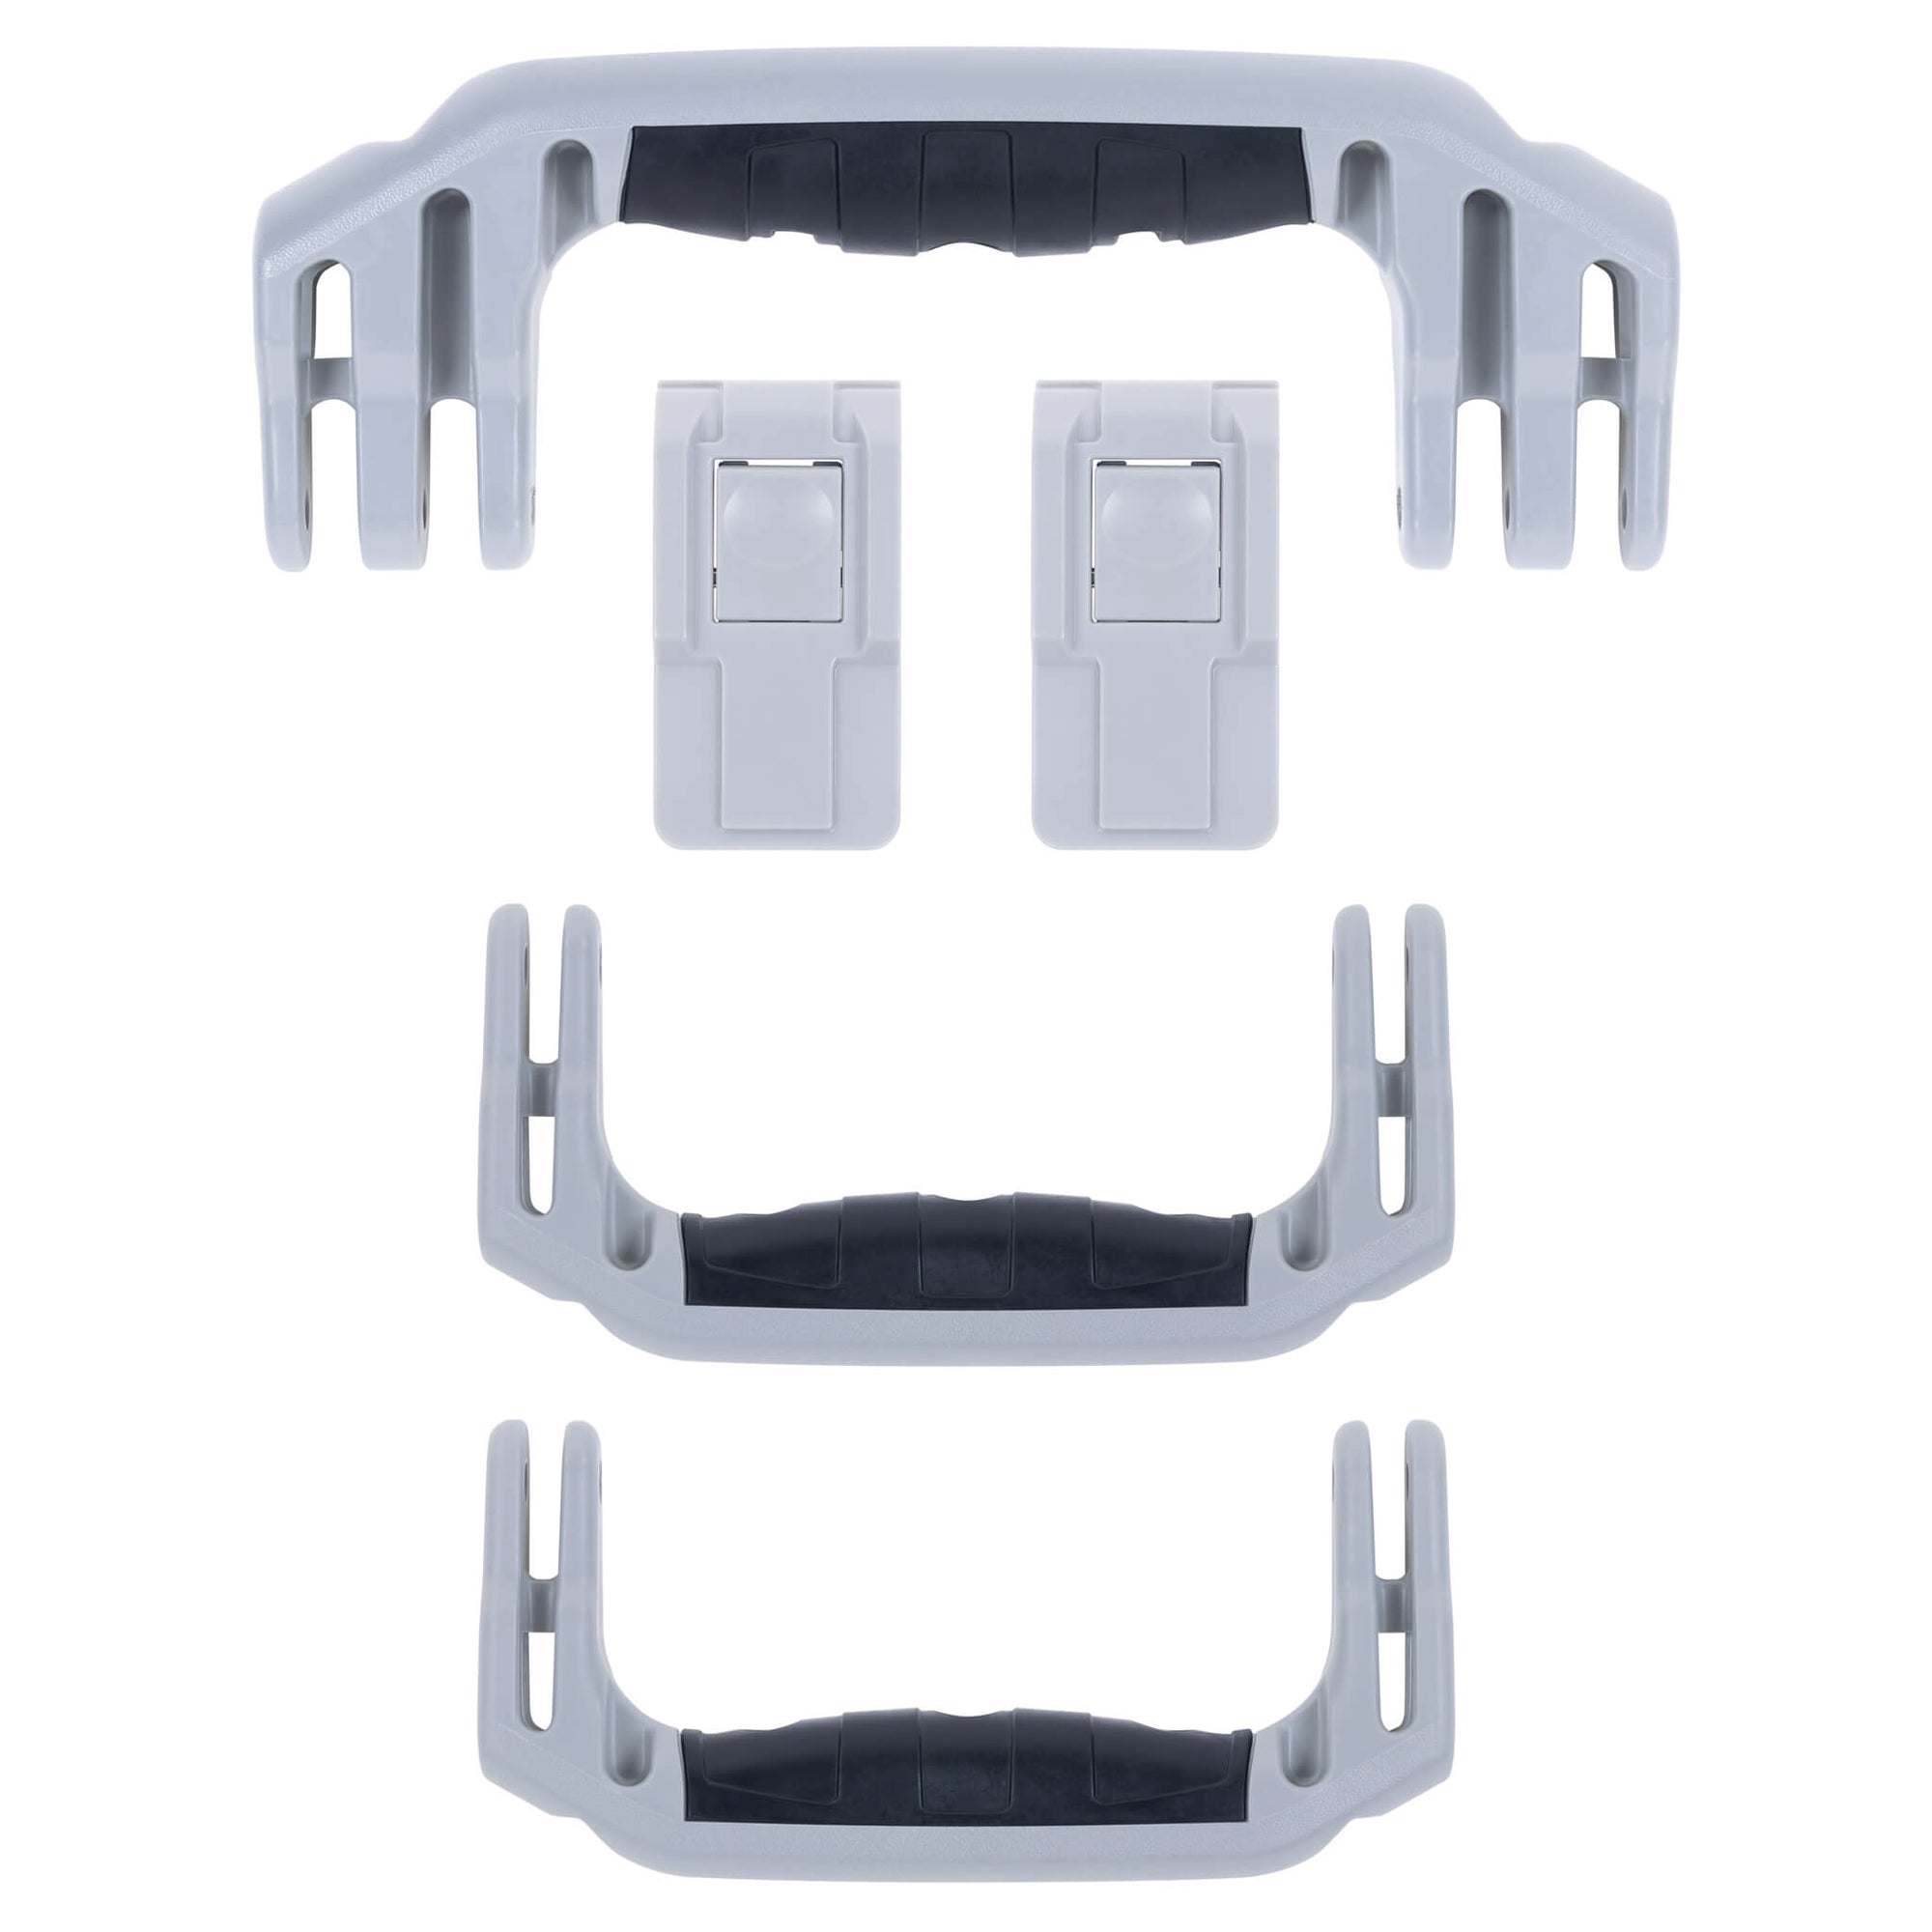 Pelican 1465 Air Replacement Handles & Latches, Silver, Push-Button (Set of 3 Handles, 2 Latches) ColorCase 